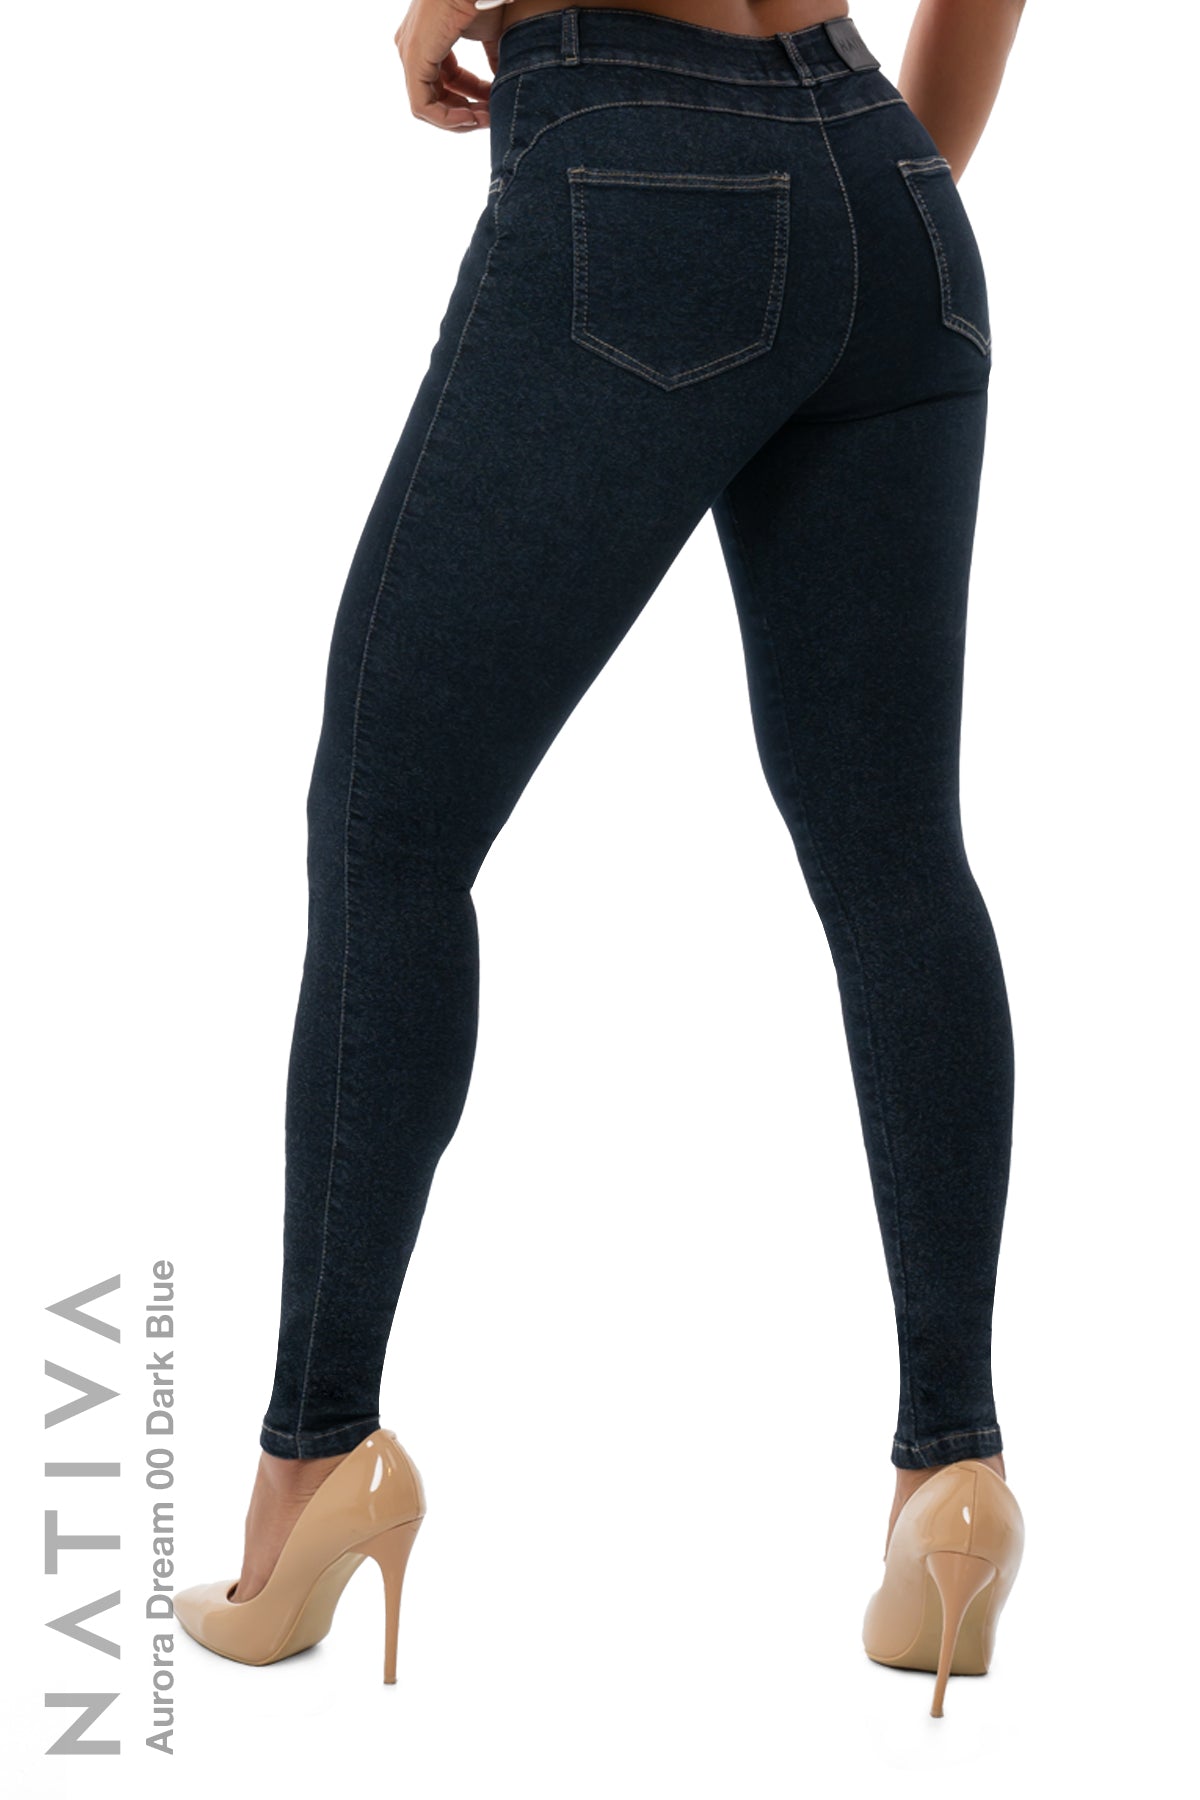 NATIVA, STRETCH JEANS. AURORA DREAM 00 DARK BLUE, High Shaping Capacity,  Ultra Comfy, 24-Hour Wear, Mid-Waisted Super Skinny Jeans